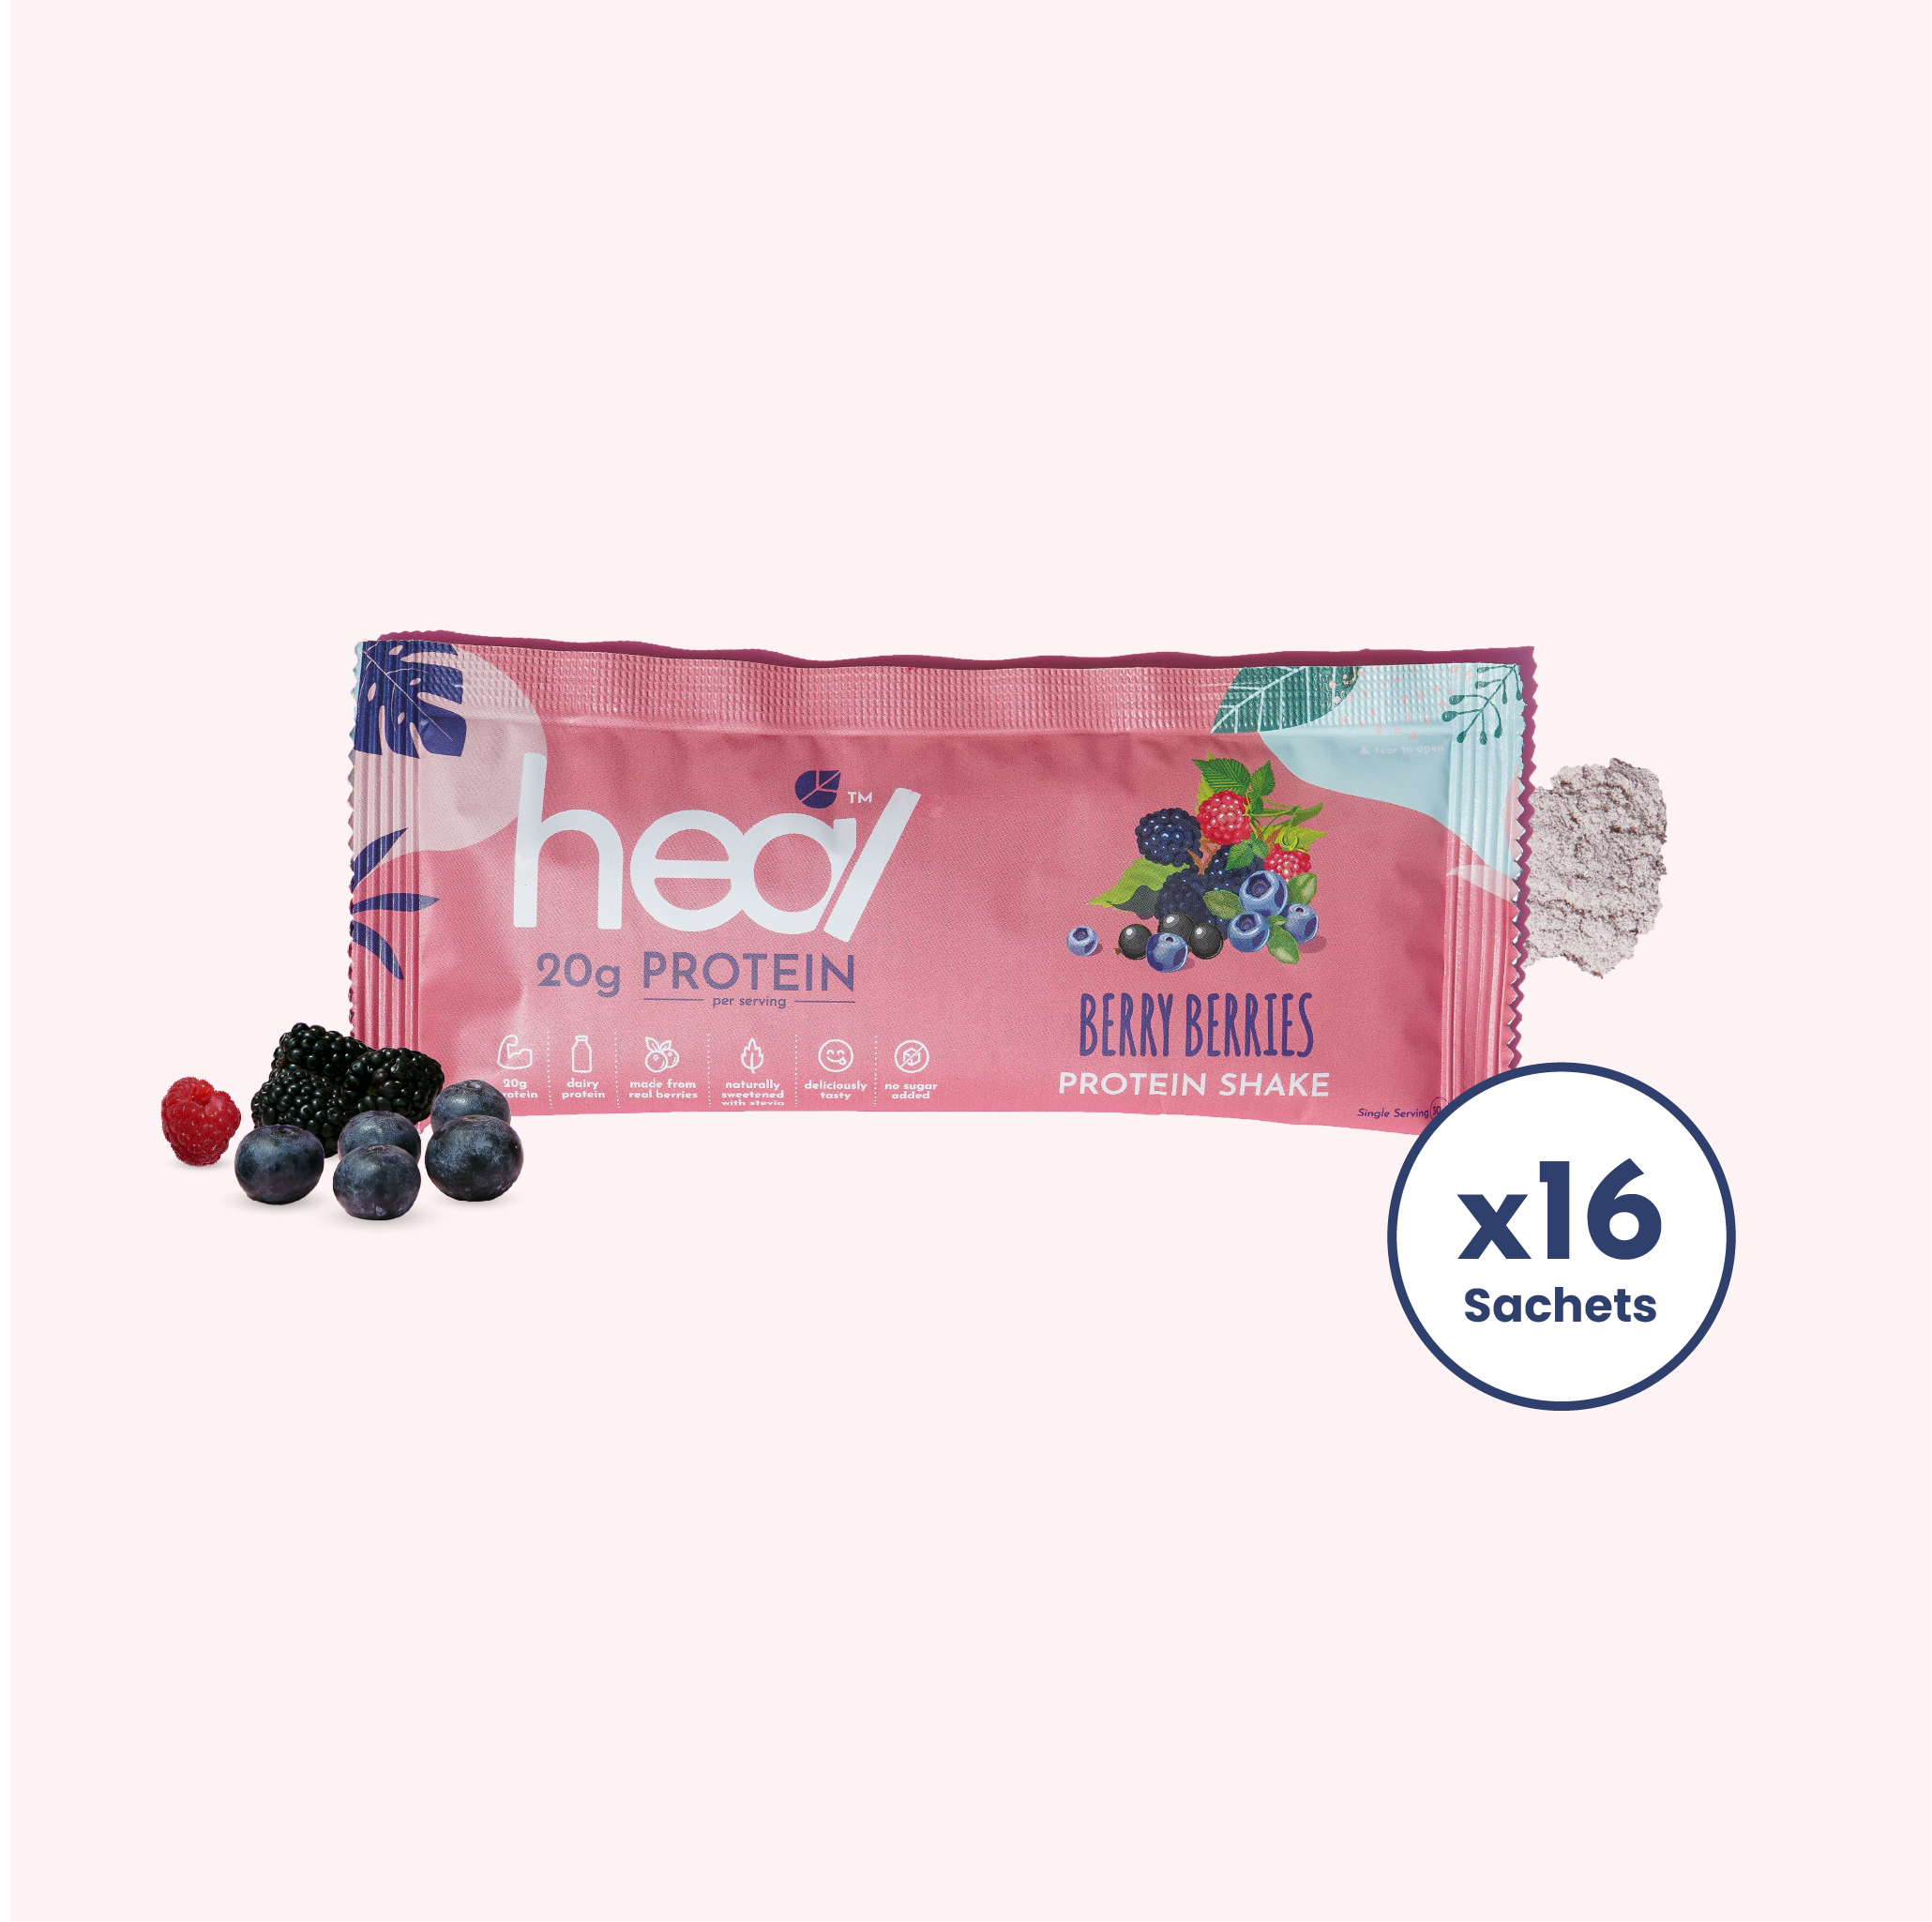 [Subscription Plan] Heal Berry Berries Protein Shake, 16 Sachets (30g)